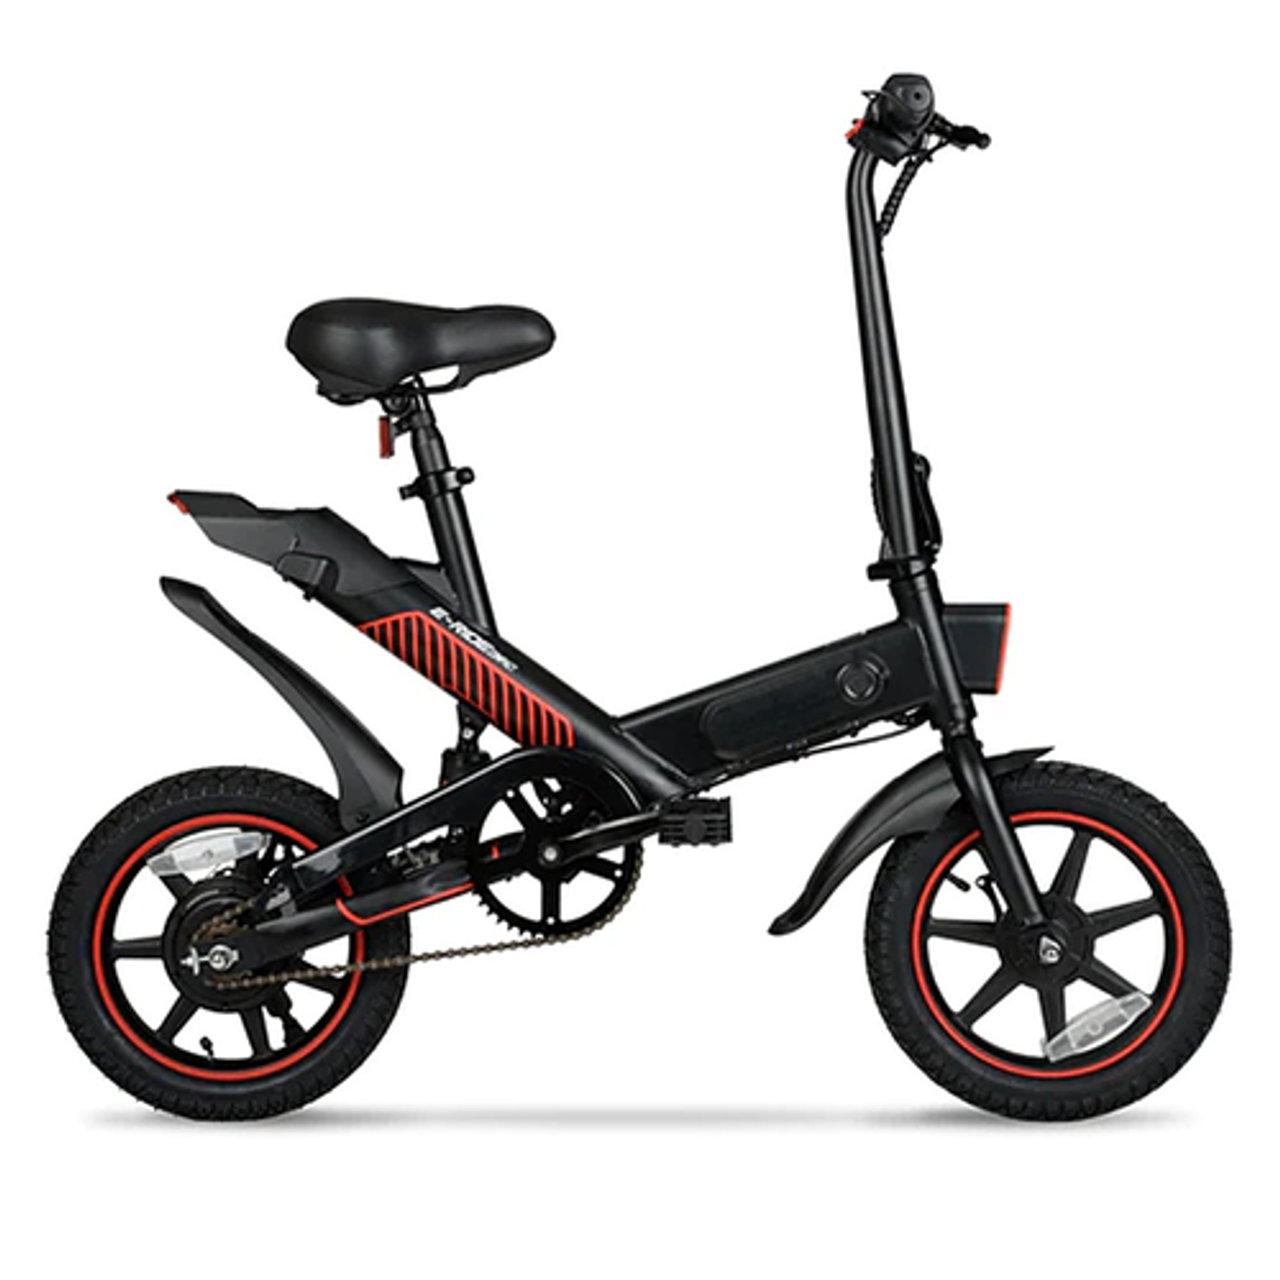 Hyper Bicycles 14" 36V Foldable Compact Electric Bike w/Throttle, 350W Motor, Recommended Ages 14 years and up - Black